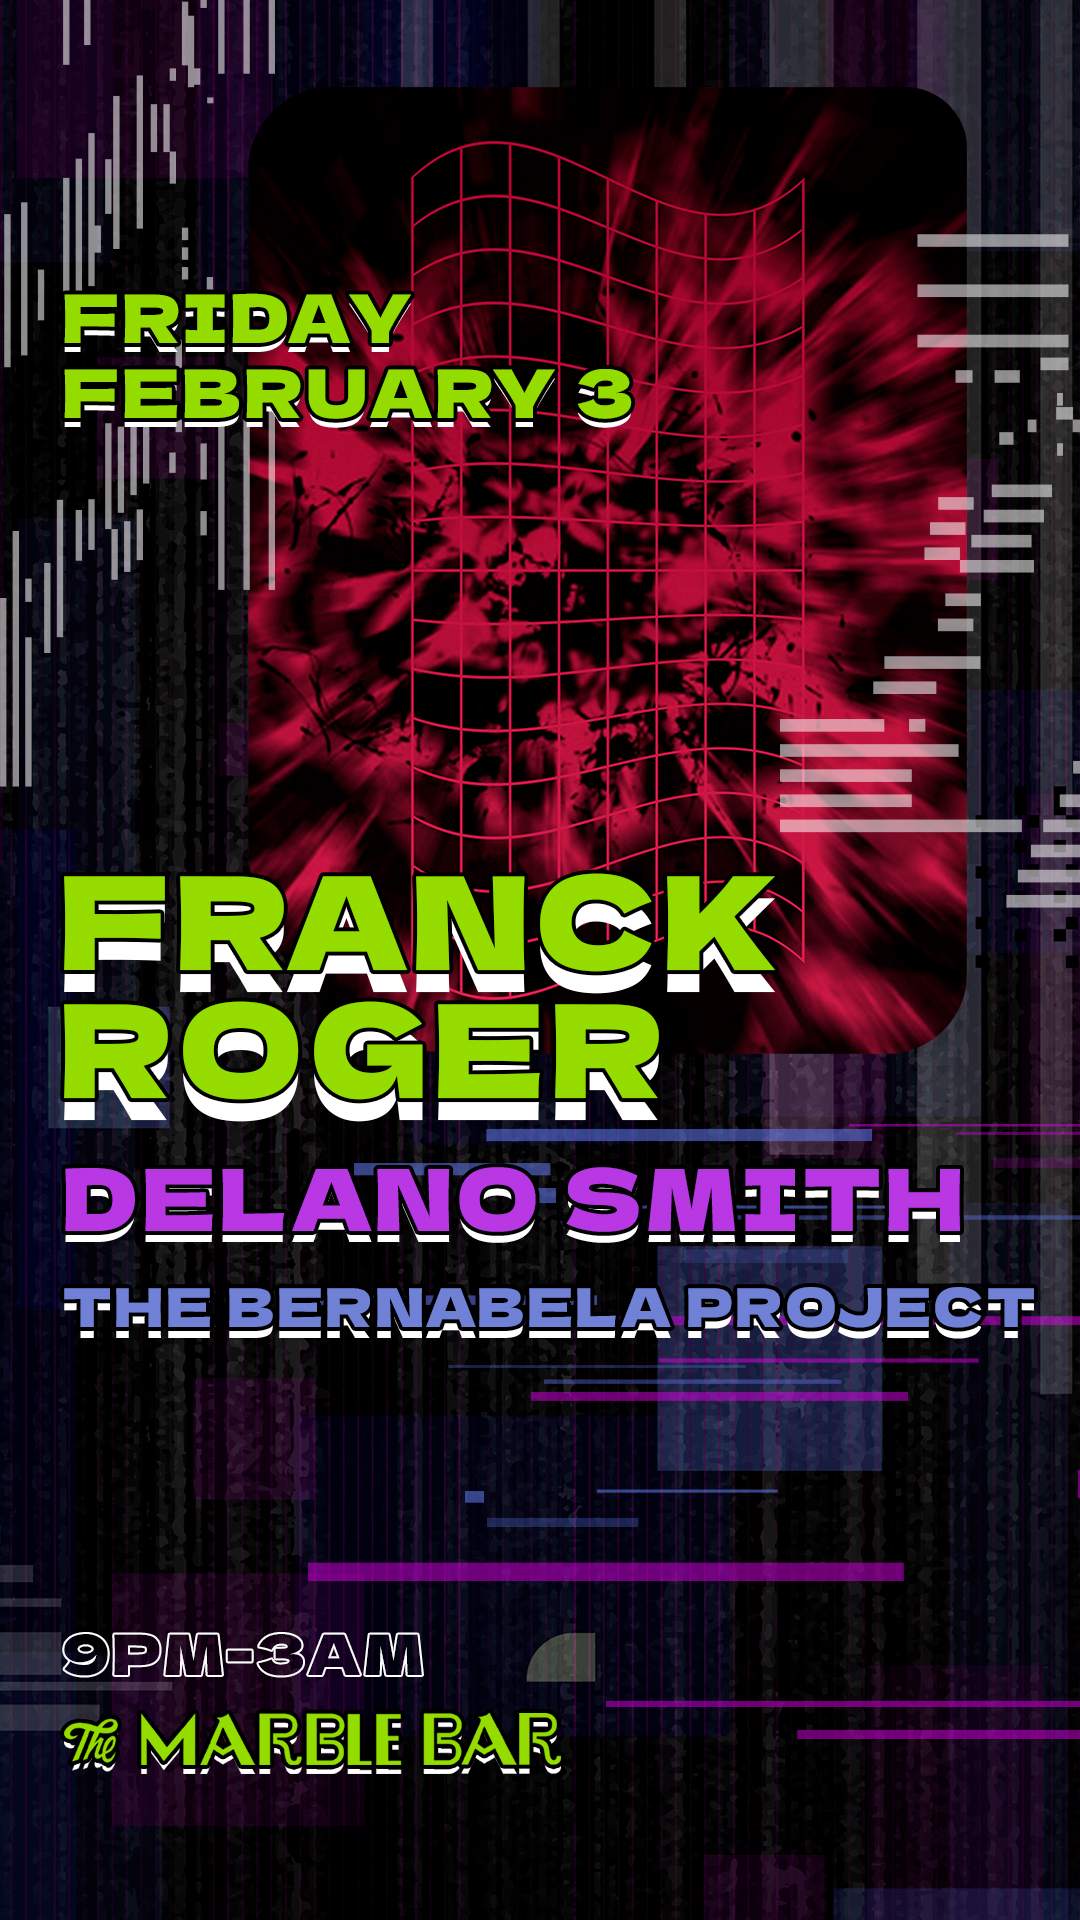 Franck Roger with Delano Smith and The Bernabela Project - Página frontal